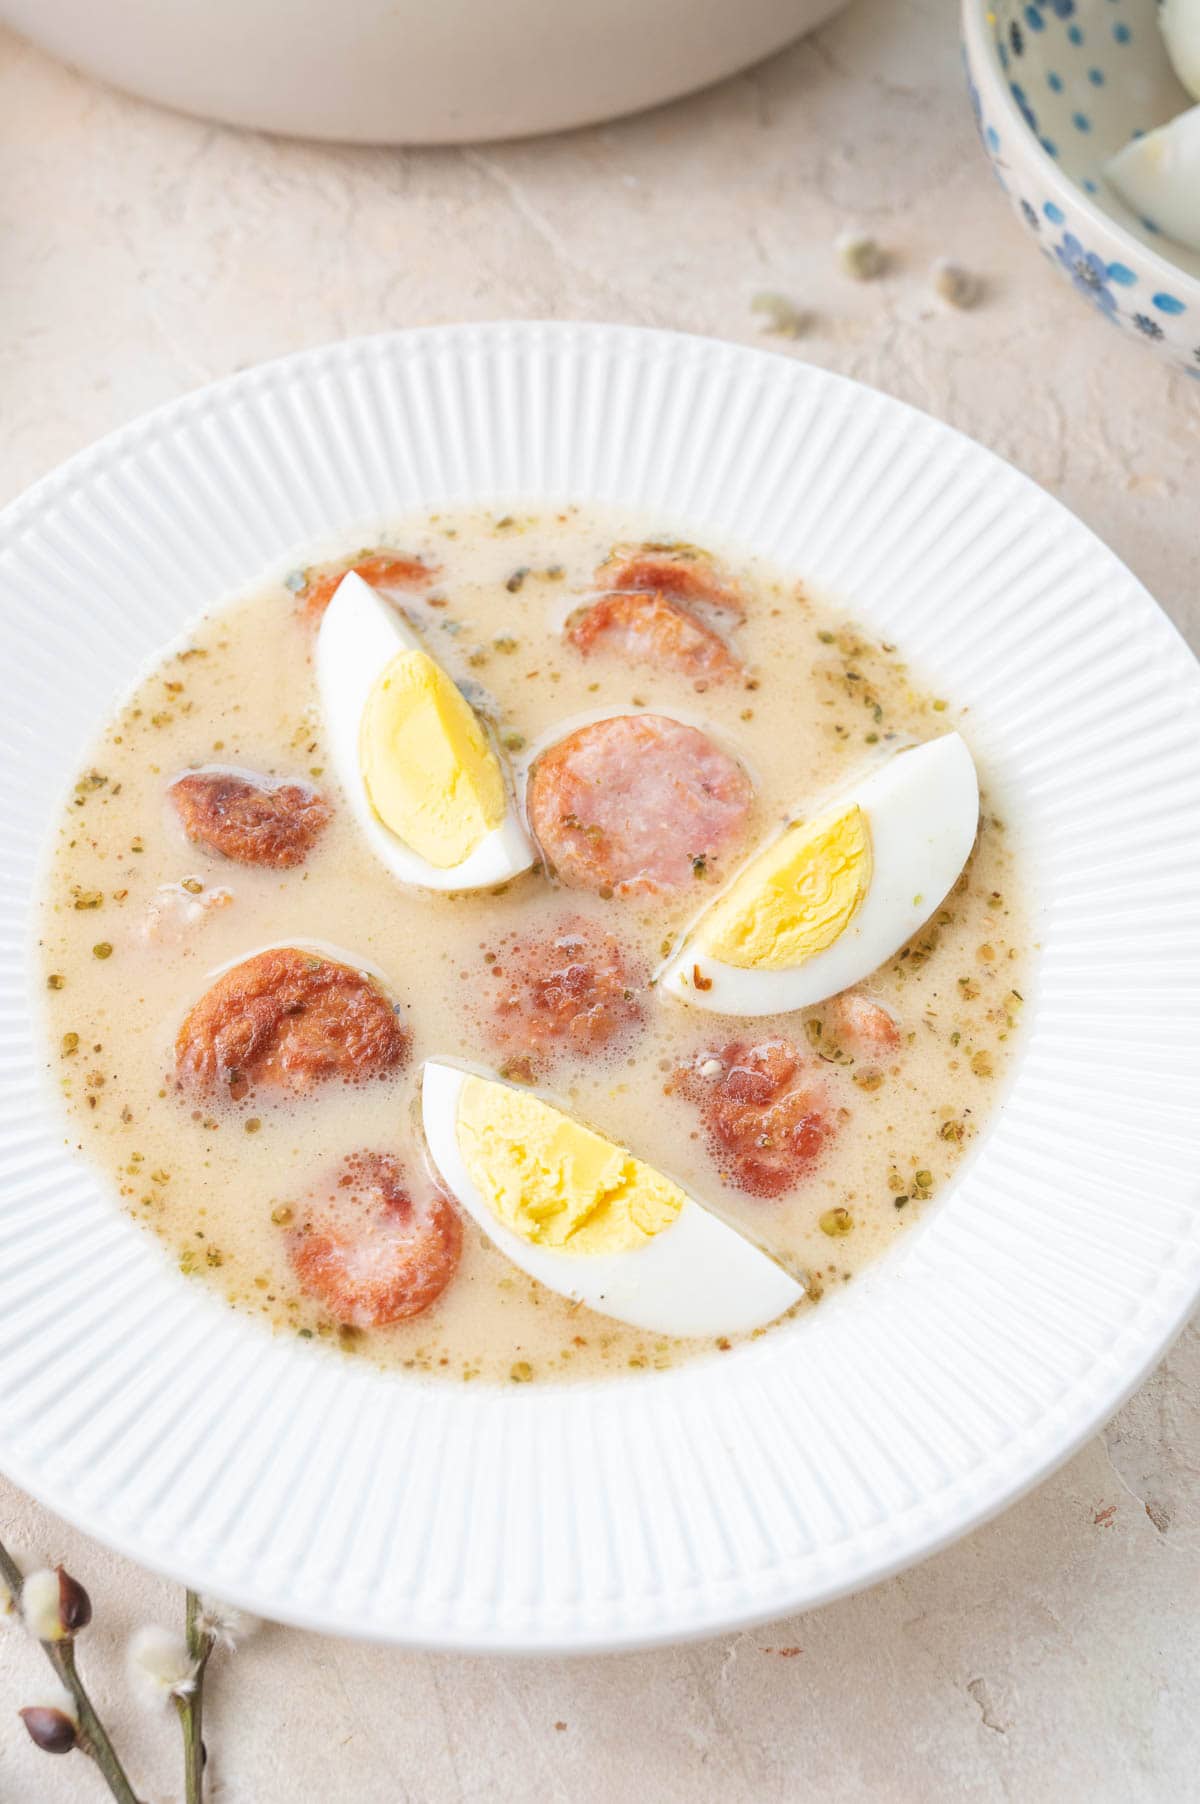 Barszcz bialy soup in a white plate, served with hard-boiled eggs.